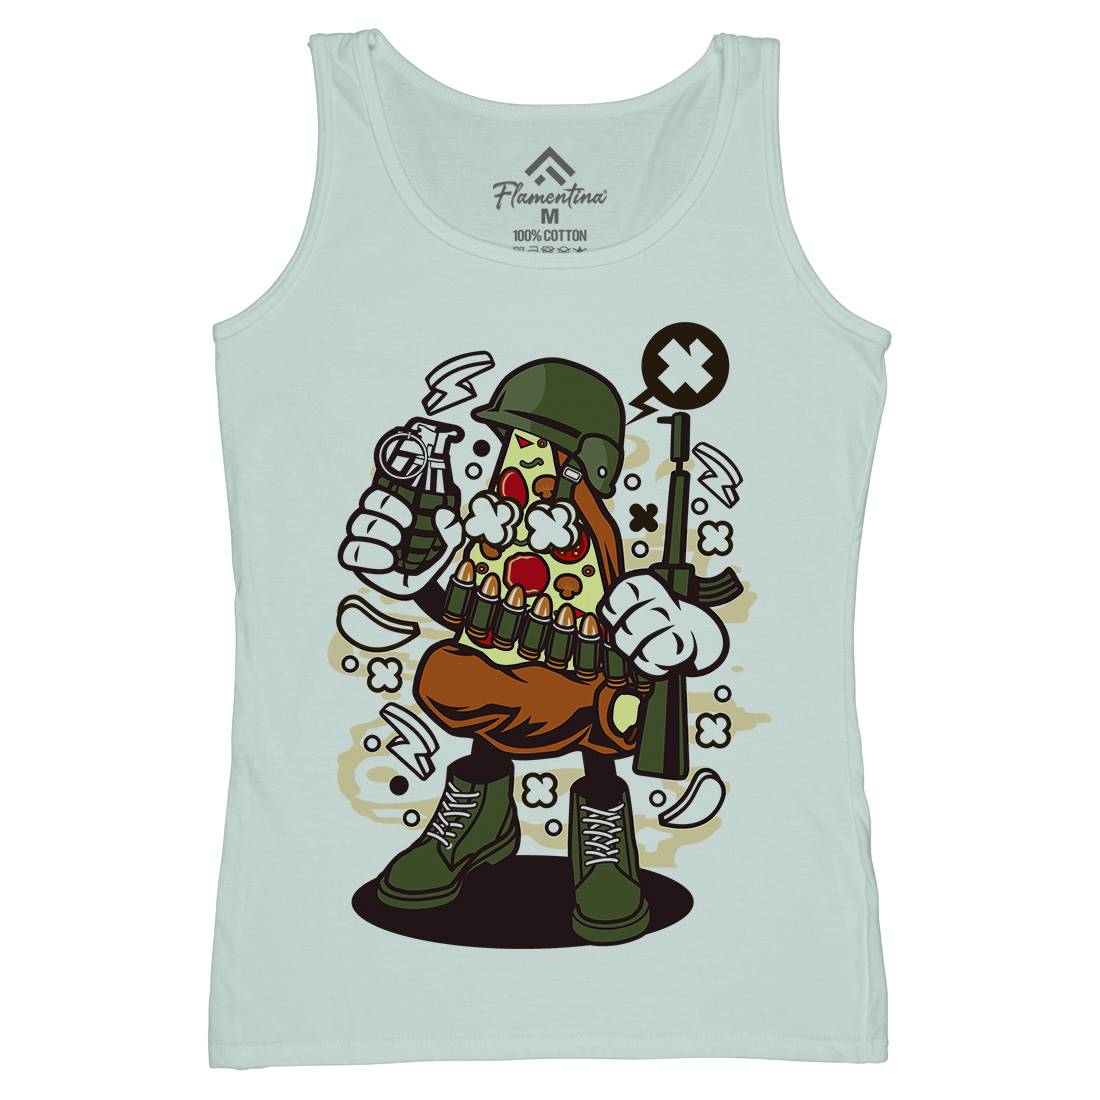 Soldier Pizza Womens Organic Tank Top Vest Army C254